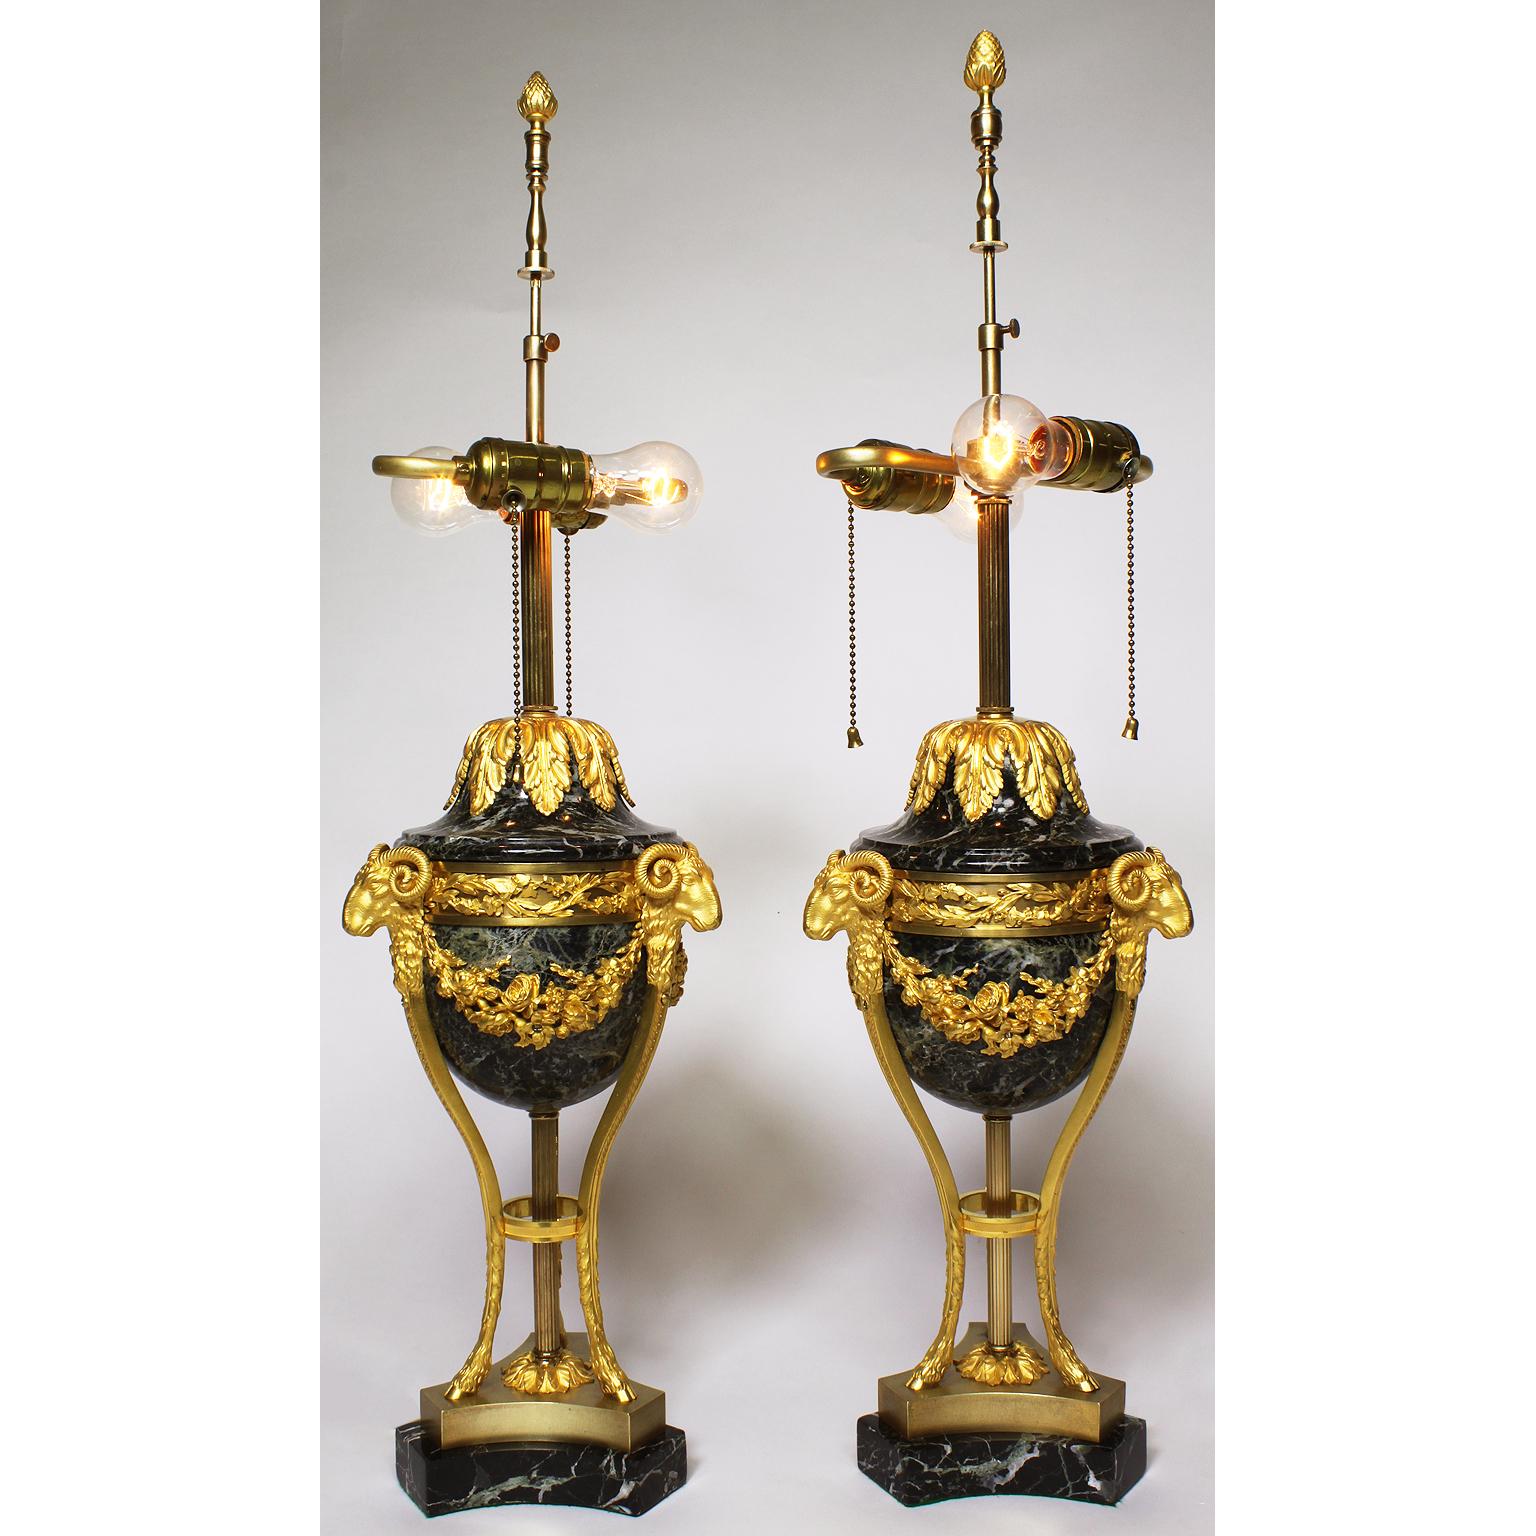 A fine pair of French 19th-20th century Louis XV style gilt bronze (Ormolu) Mounted and Vert Maurin marble (Veined Green Marble) figural urn Lamps. The ovoid variegated green marble bodies, each surmounted with ram's mask monopodia conjoint by